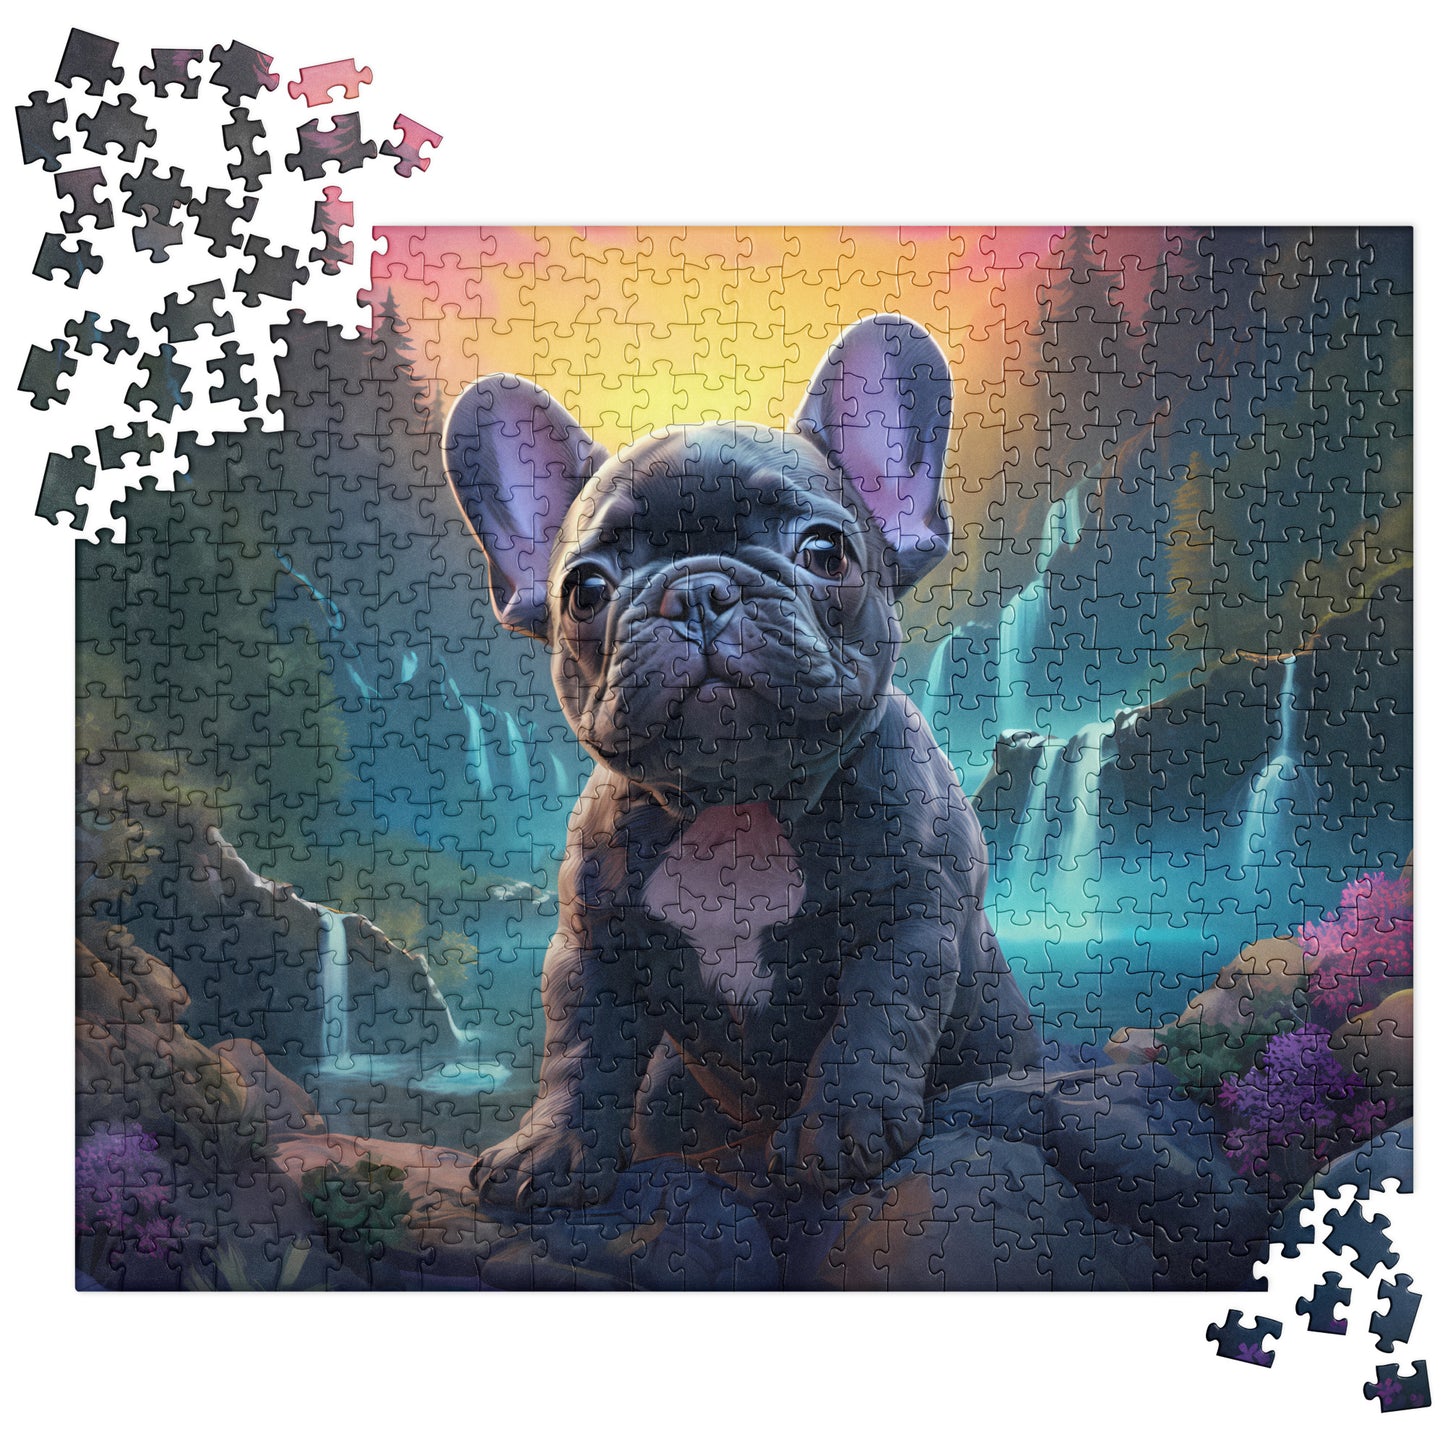 Fountains & Frenchies - Jigsaw Puzzle